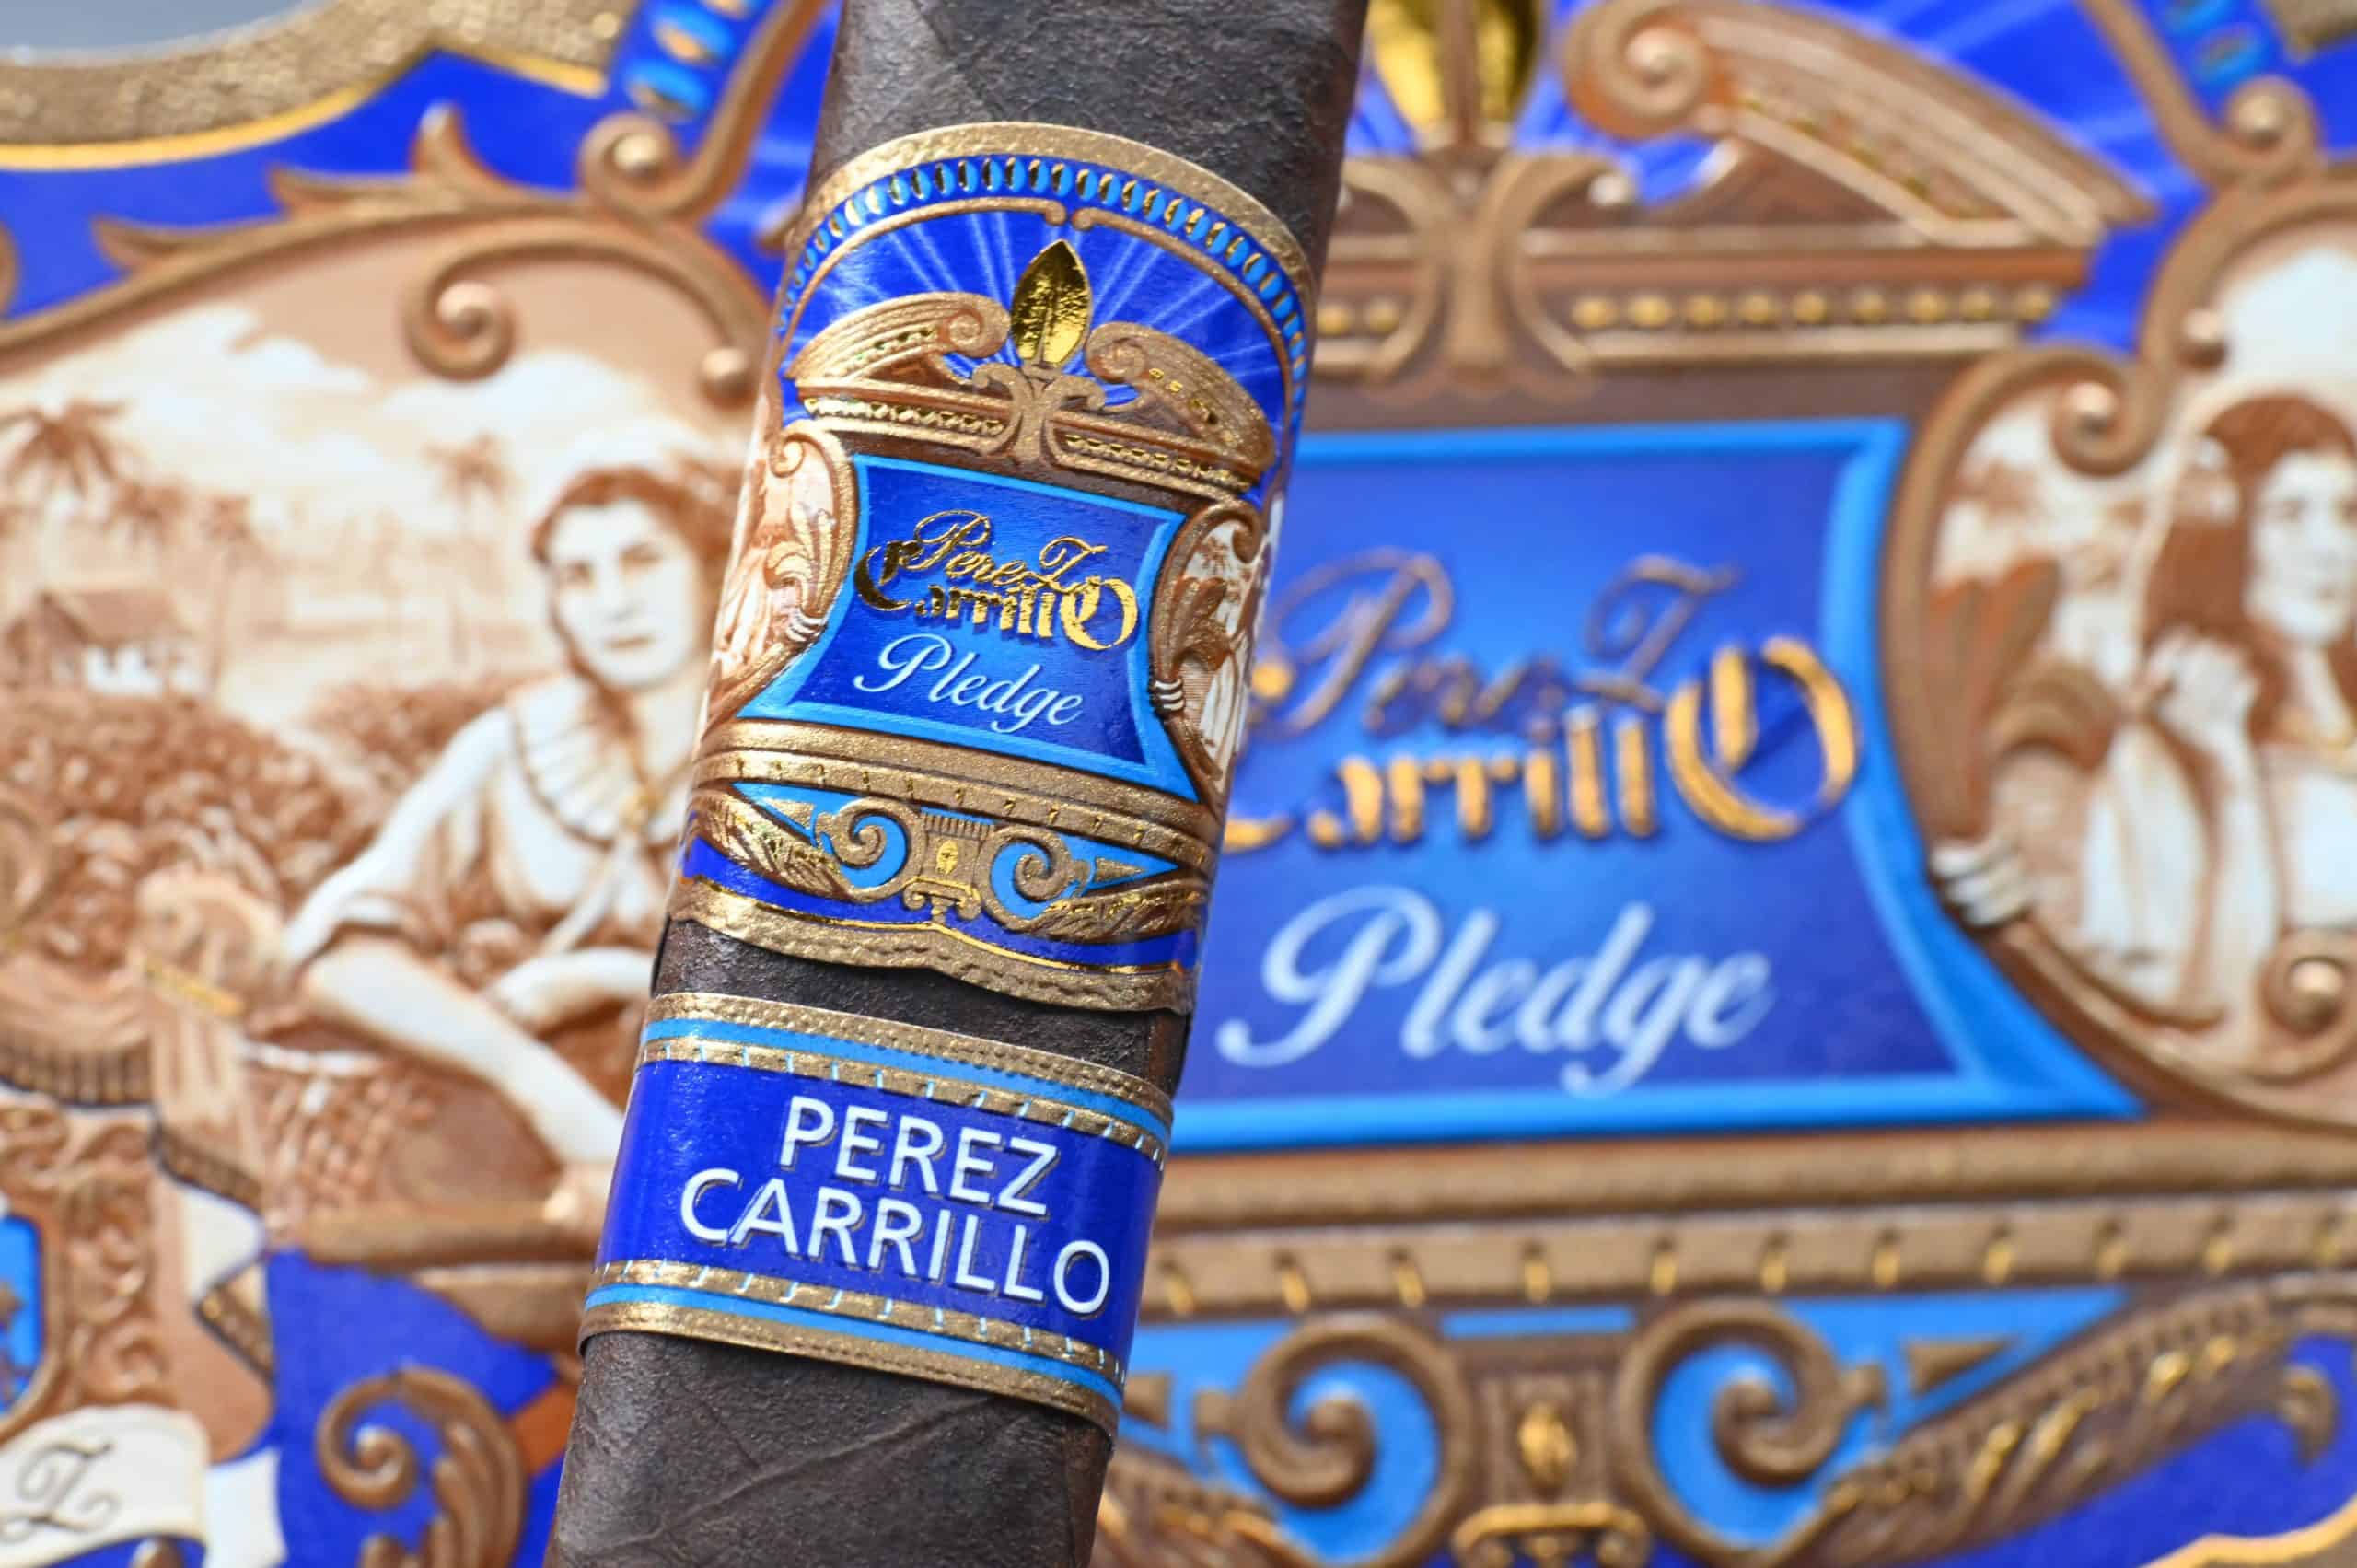 Pledge launches as a tribute by Ernesto Perez-Carrillo to cigar fans